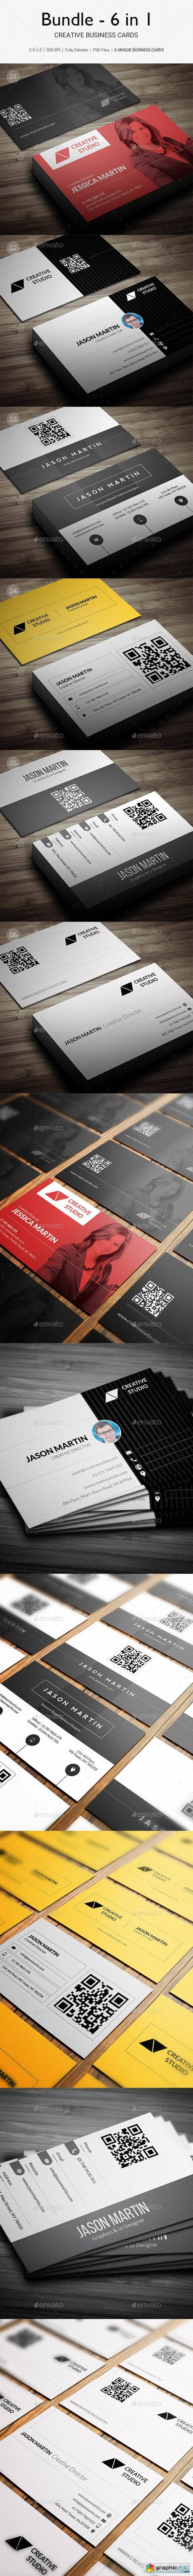 Bundle - 6 in 1 - Creative Business Cards - B29